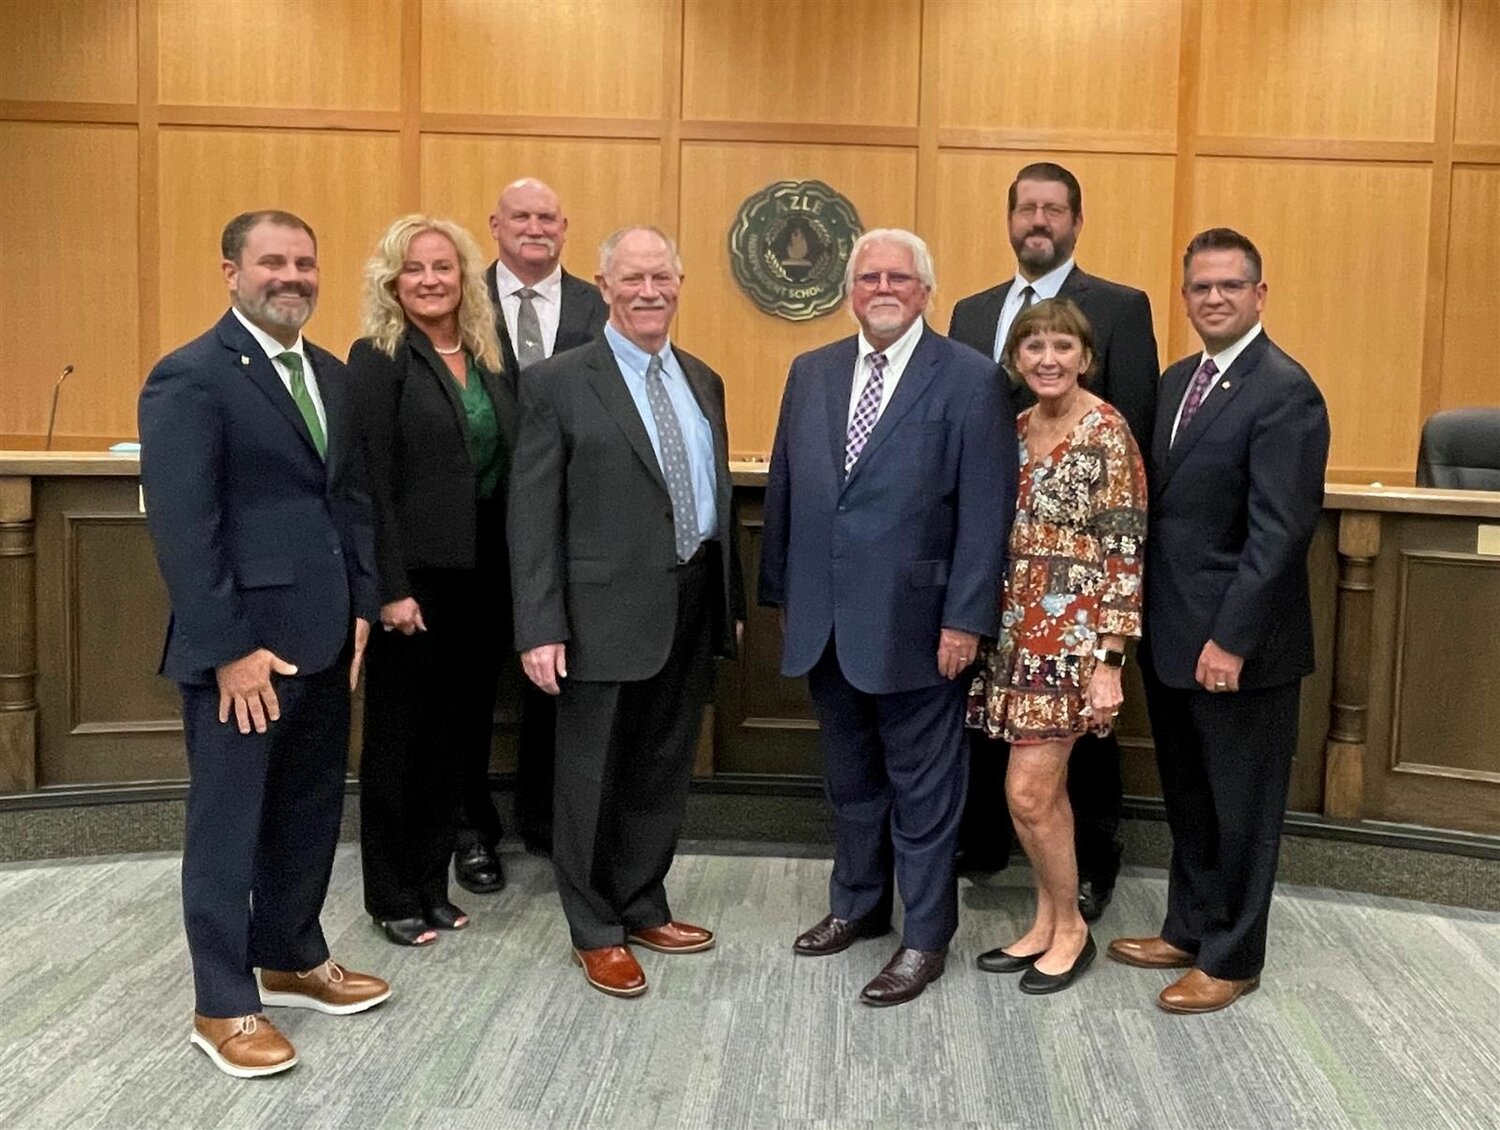 Azle ISD’s board of trustee members are (l-r): along with Superintendent Todd Smith, Sarah Bennett, Jeff Edwards, Ray Lea, Board President Bill Lane, Jeremy May, Dr. Brenda Reed and Vice President Tim Brown. The district celebrated these individuals with social media posts throughout January.